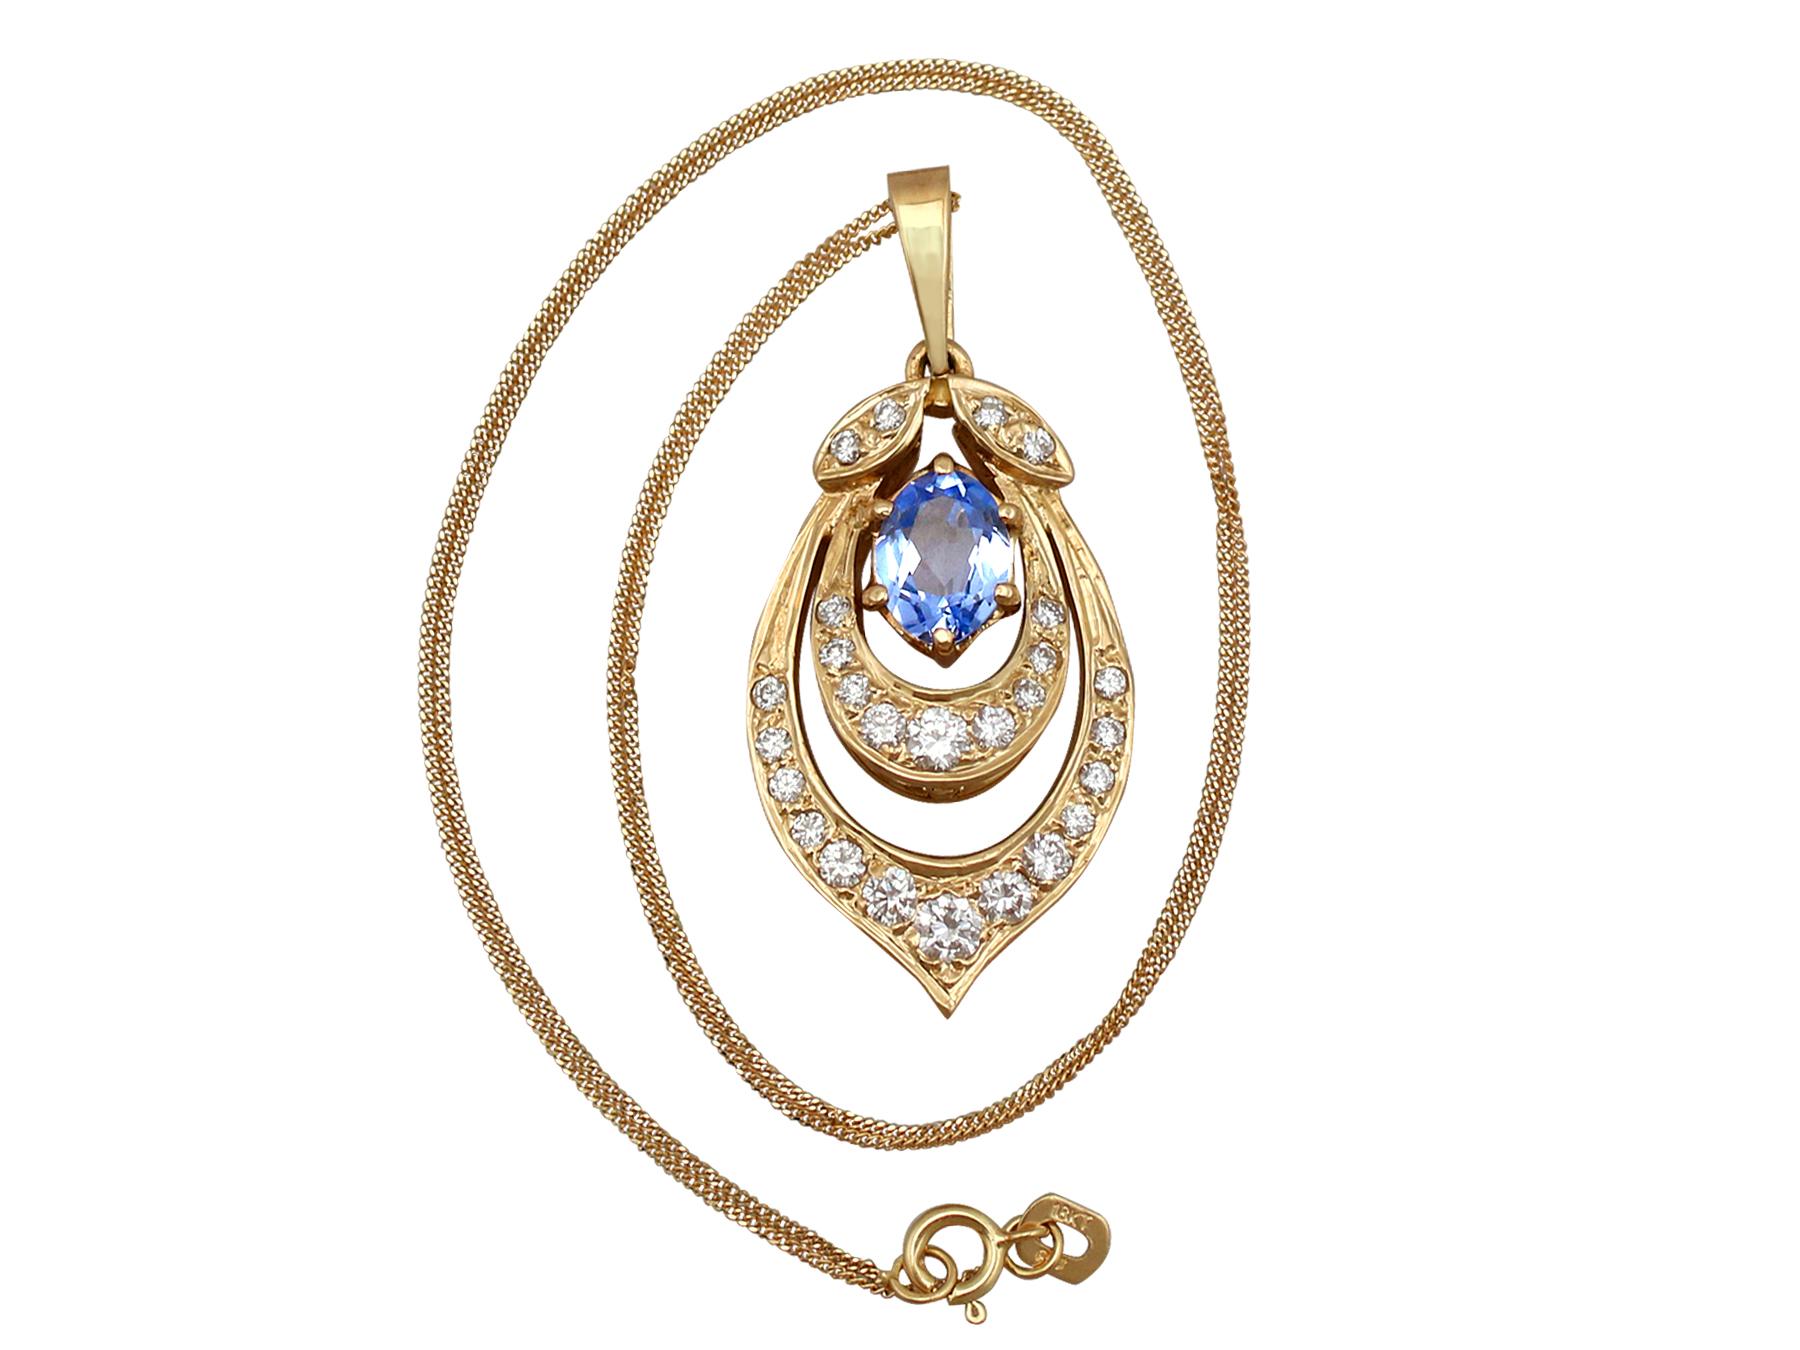 A fine and impressive 1.10 carat aquamarine and 0.92 carat diamond, 18 karat yellow gold pendant; part of our diverse vintage jewelry and estate jewelry collections.

This fine and impressive oval cut pendant has been crafted in 18k yellow